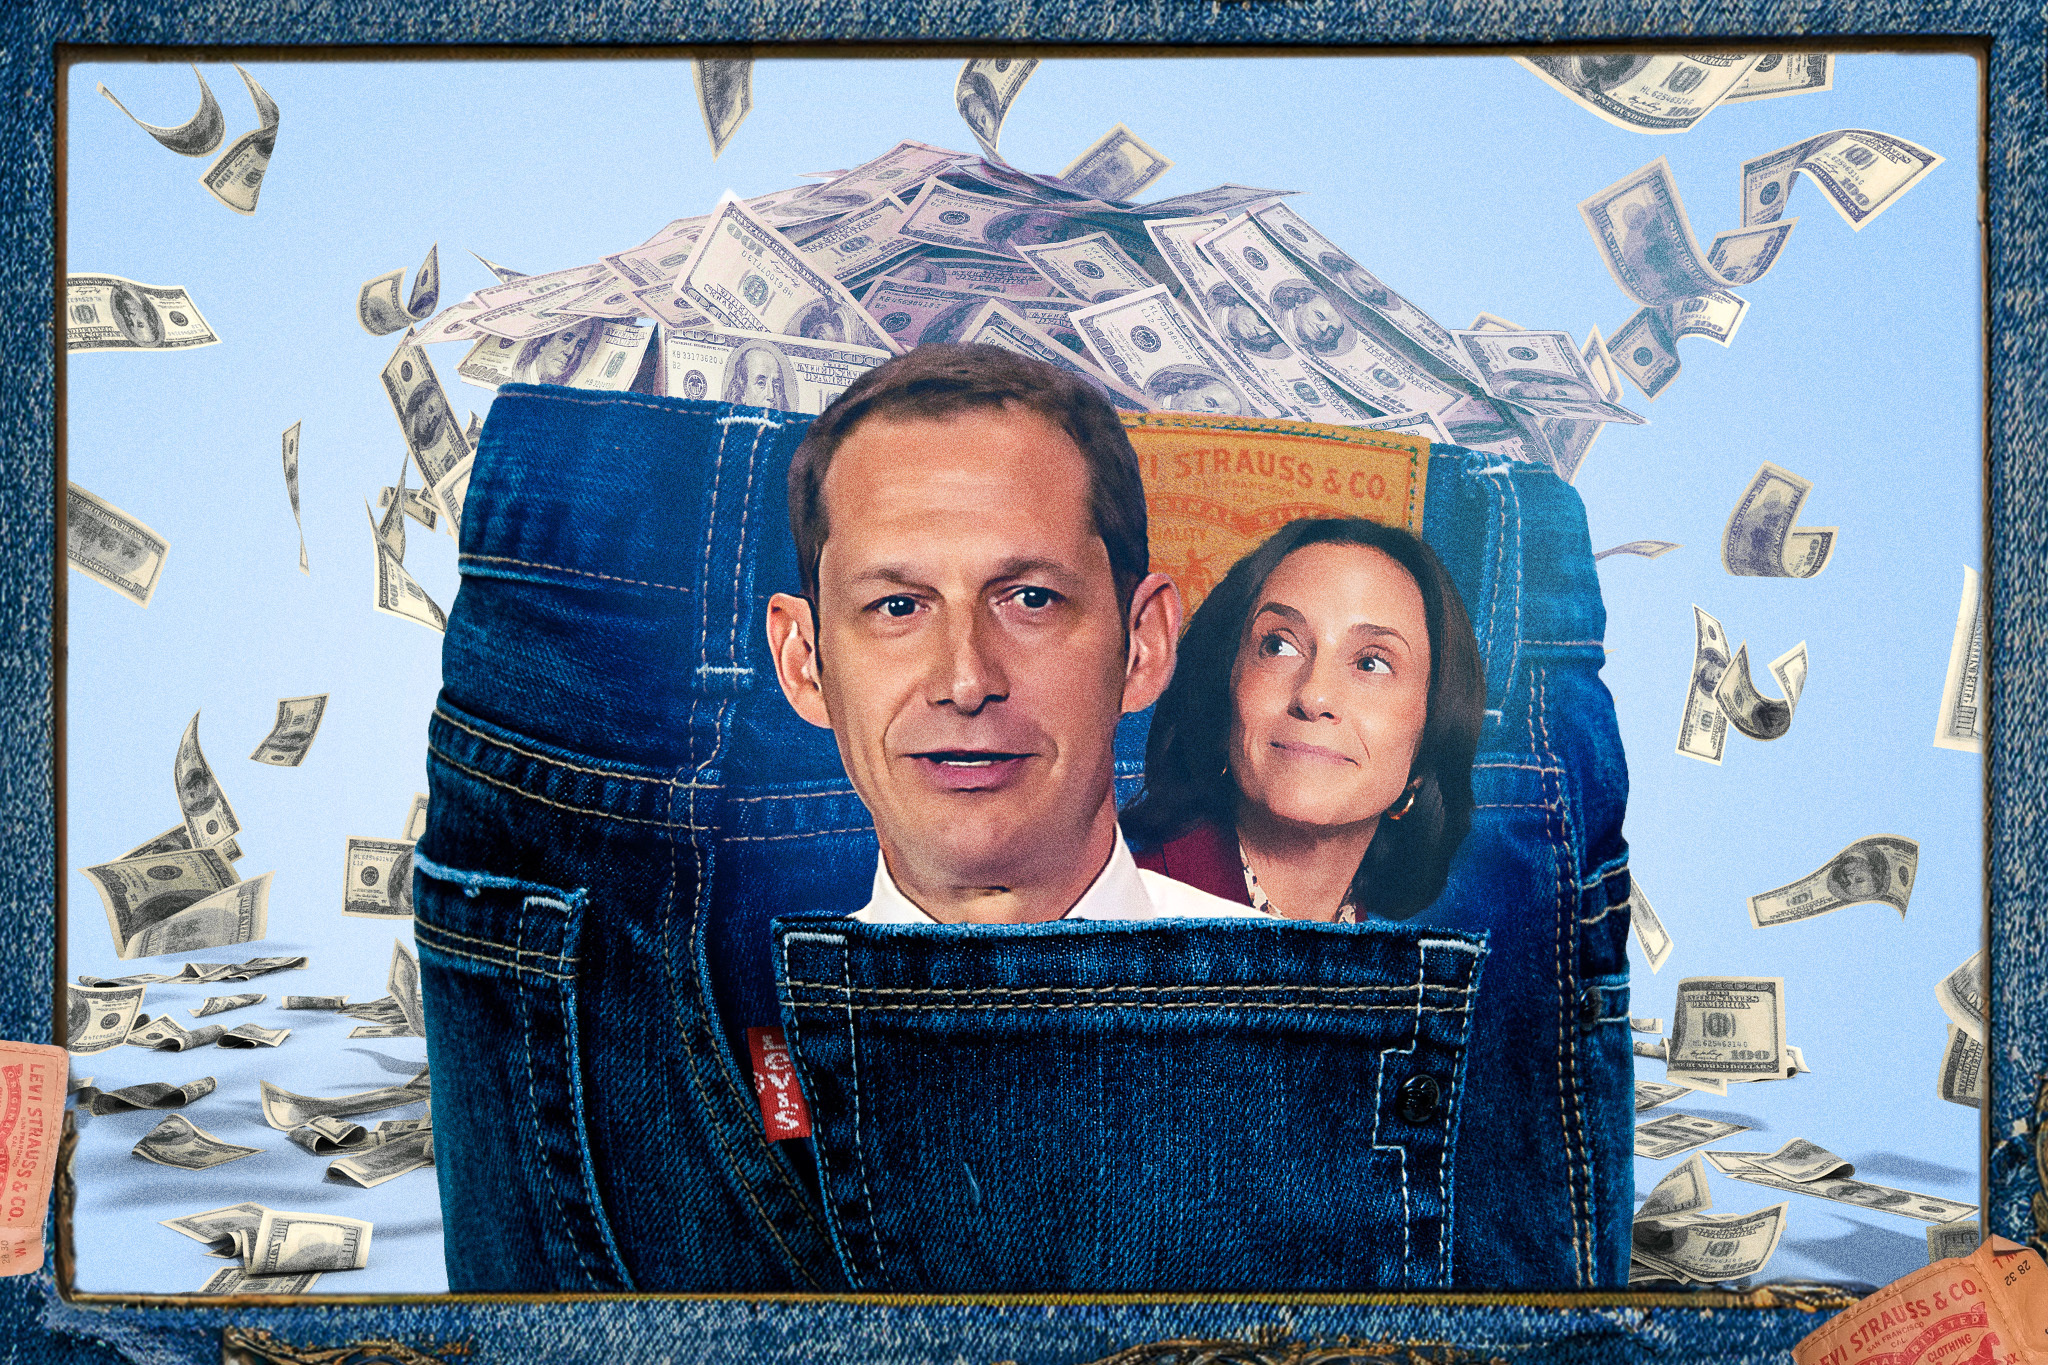 Daniel Lurie and his wife, Becca Prowad, sit inside a Levi's jeans back pocket as cash flies around against a blue background.